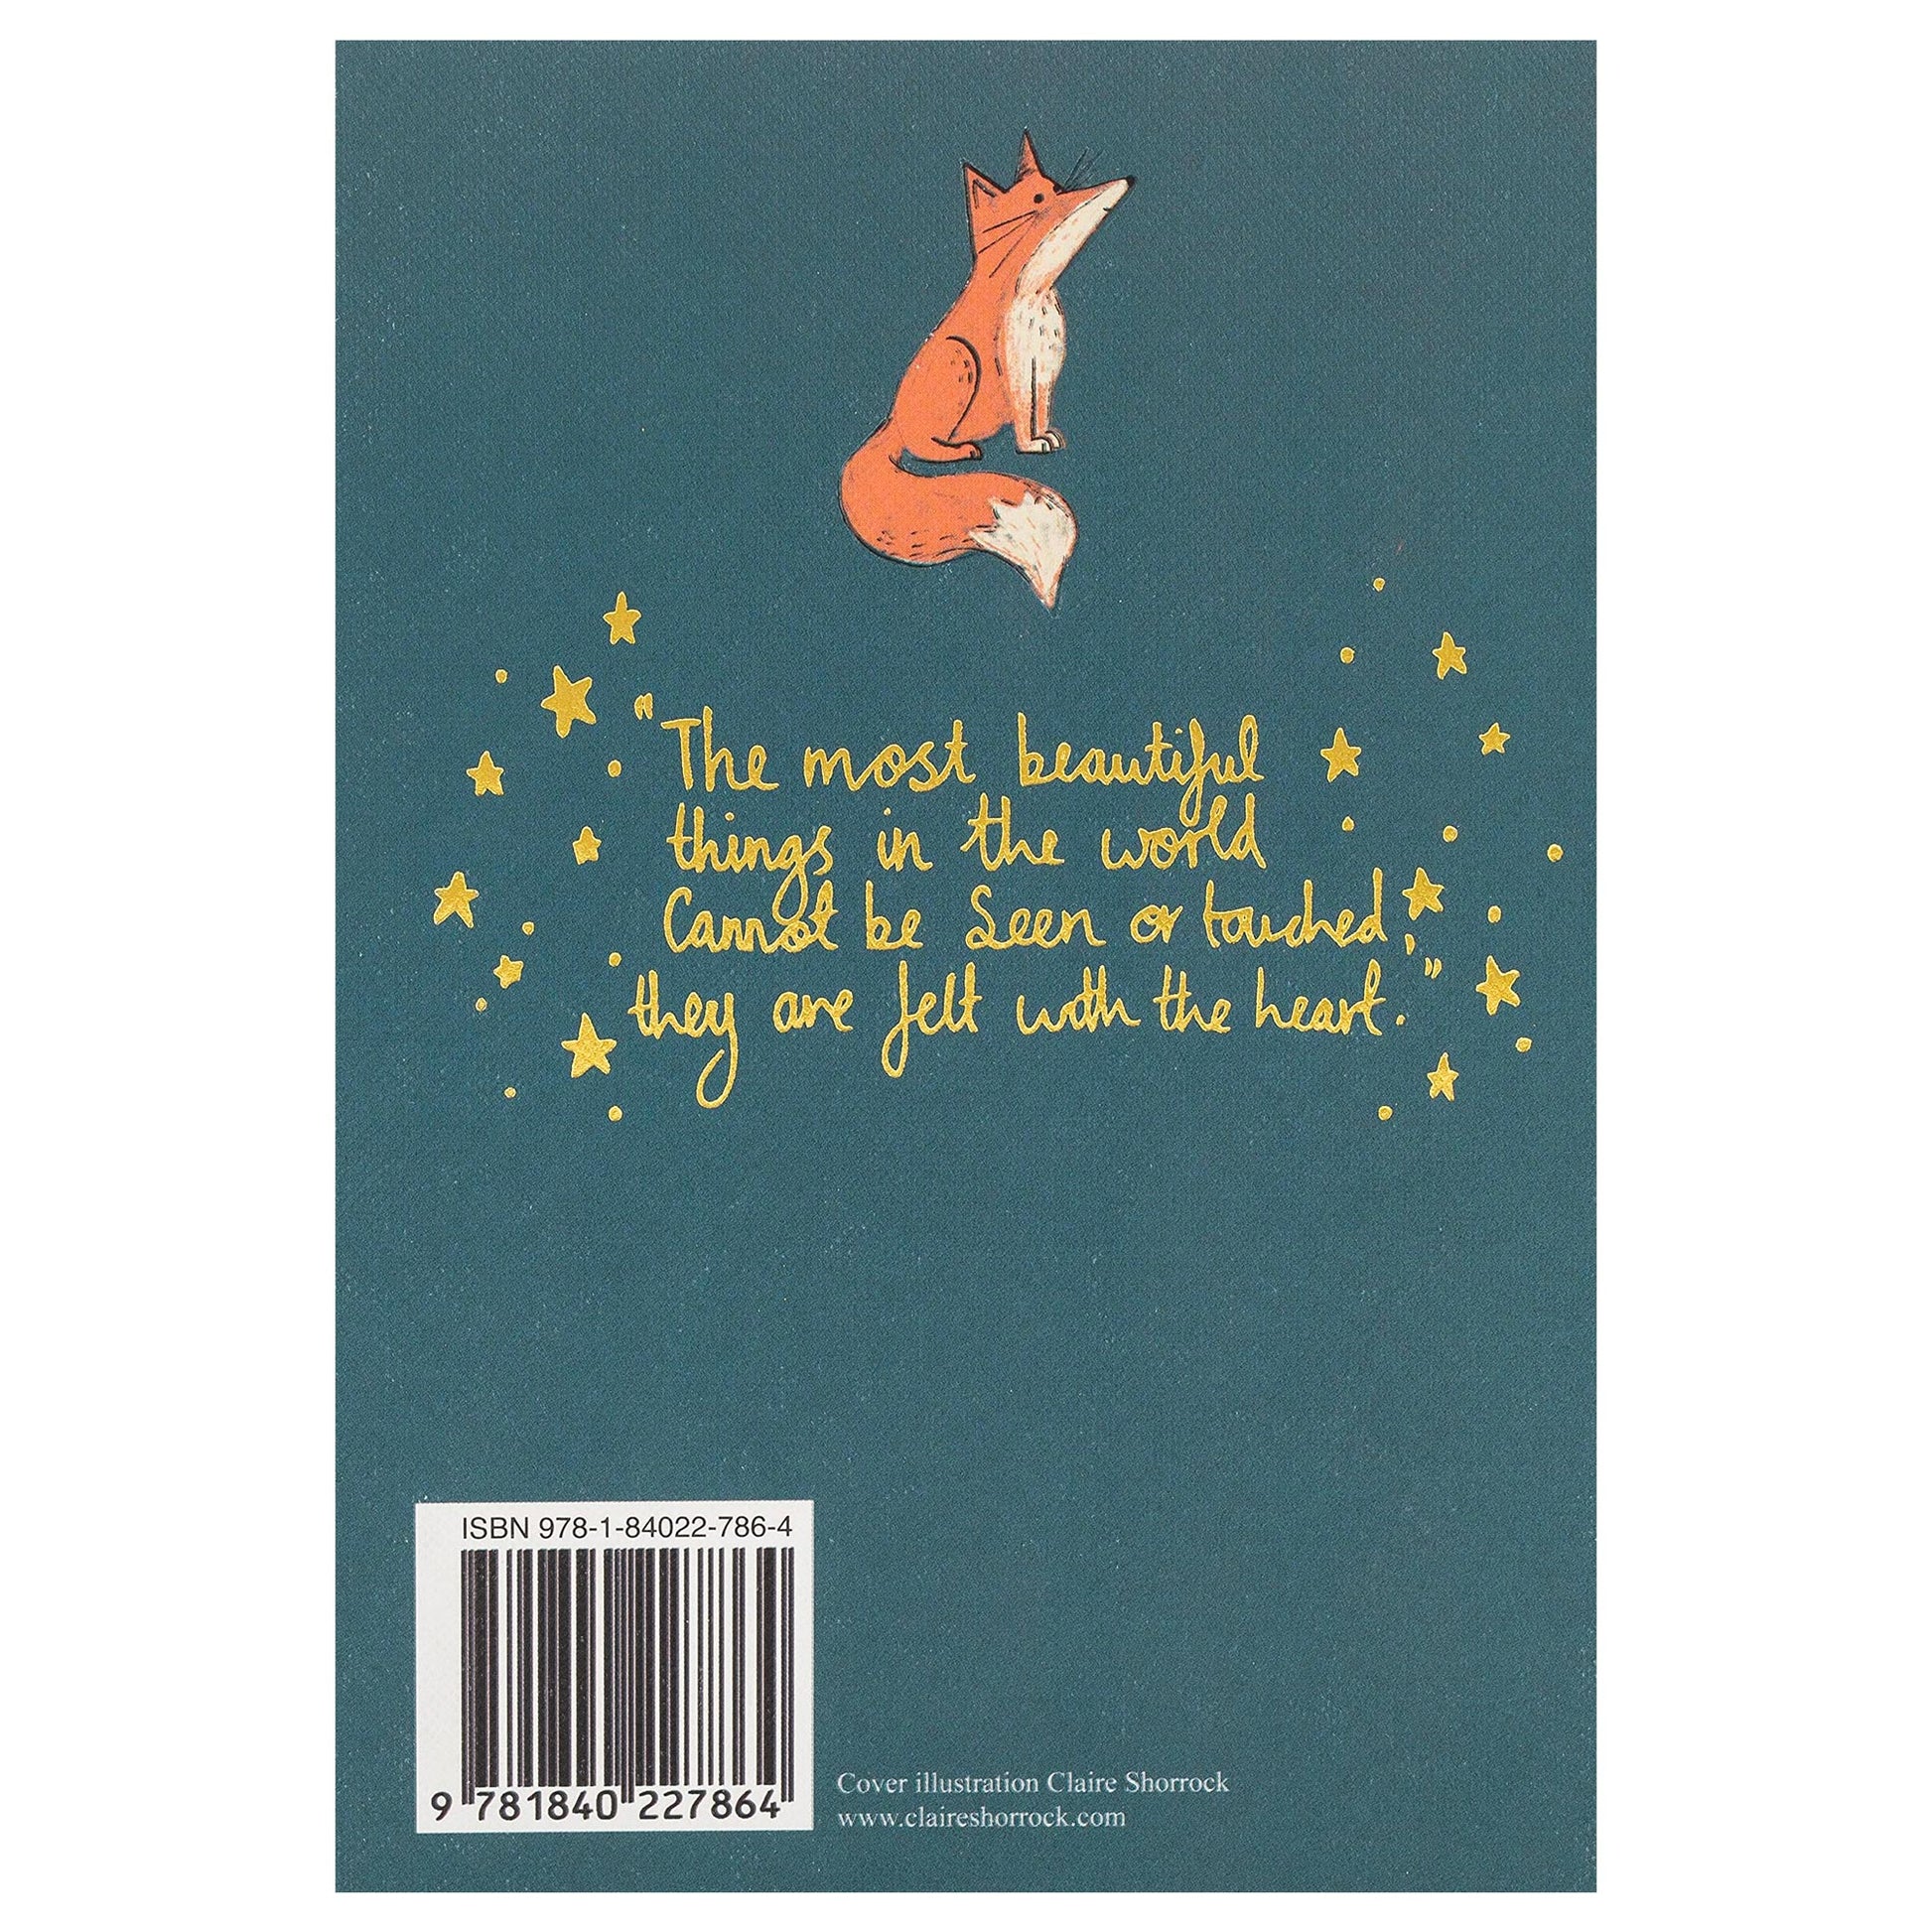 The Little Prince by Antoine de Saint-Exupery - Wordsworth Collector's Edition